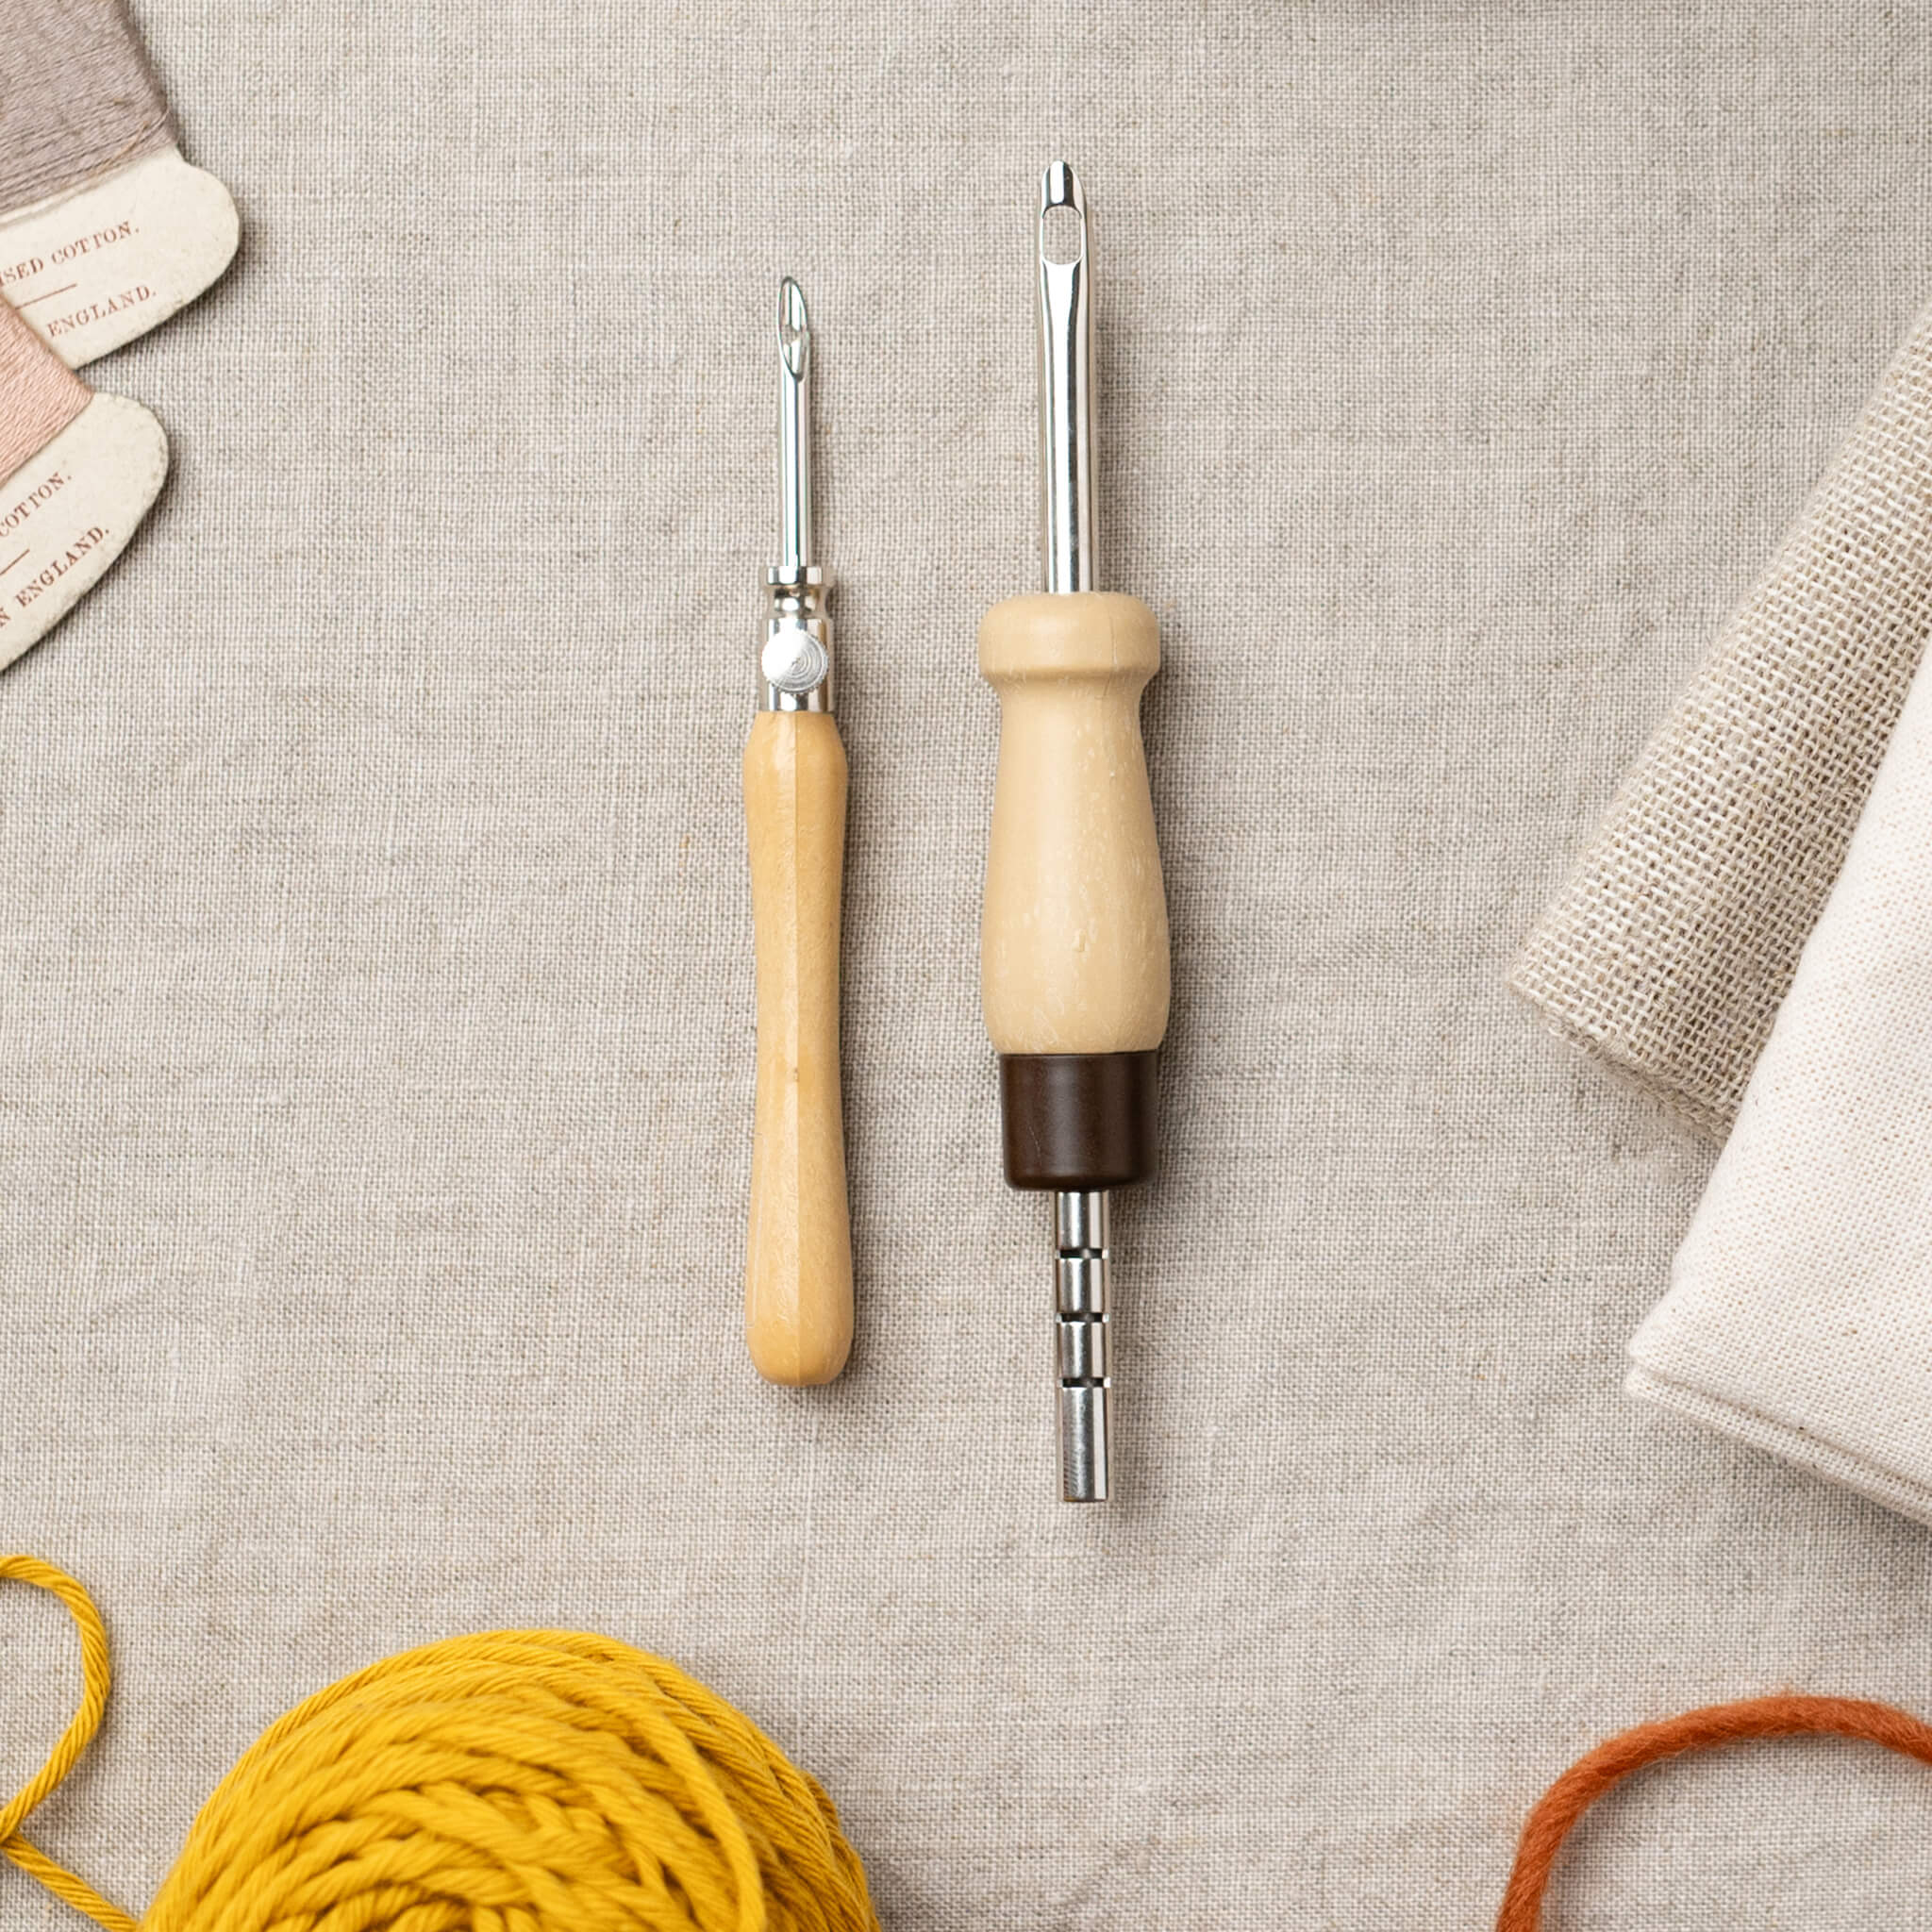 Lavor Punch Needle Embroidery Tool